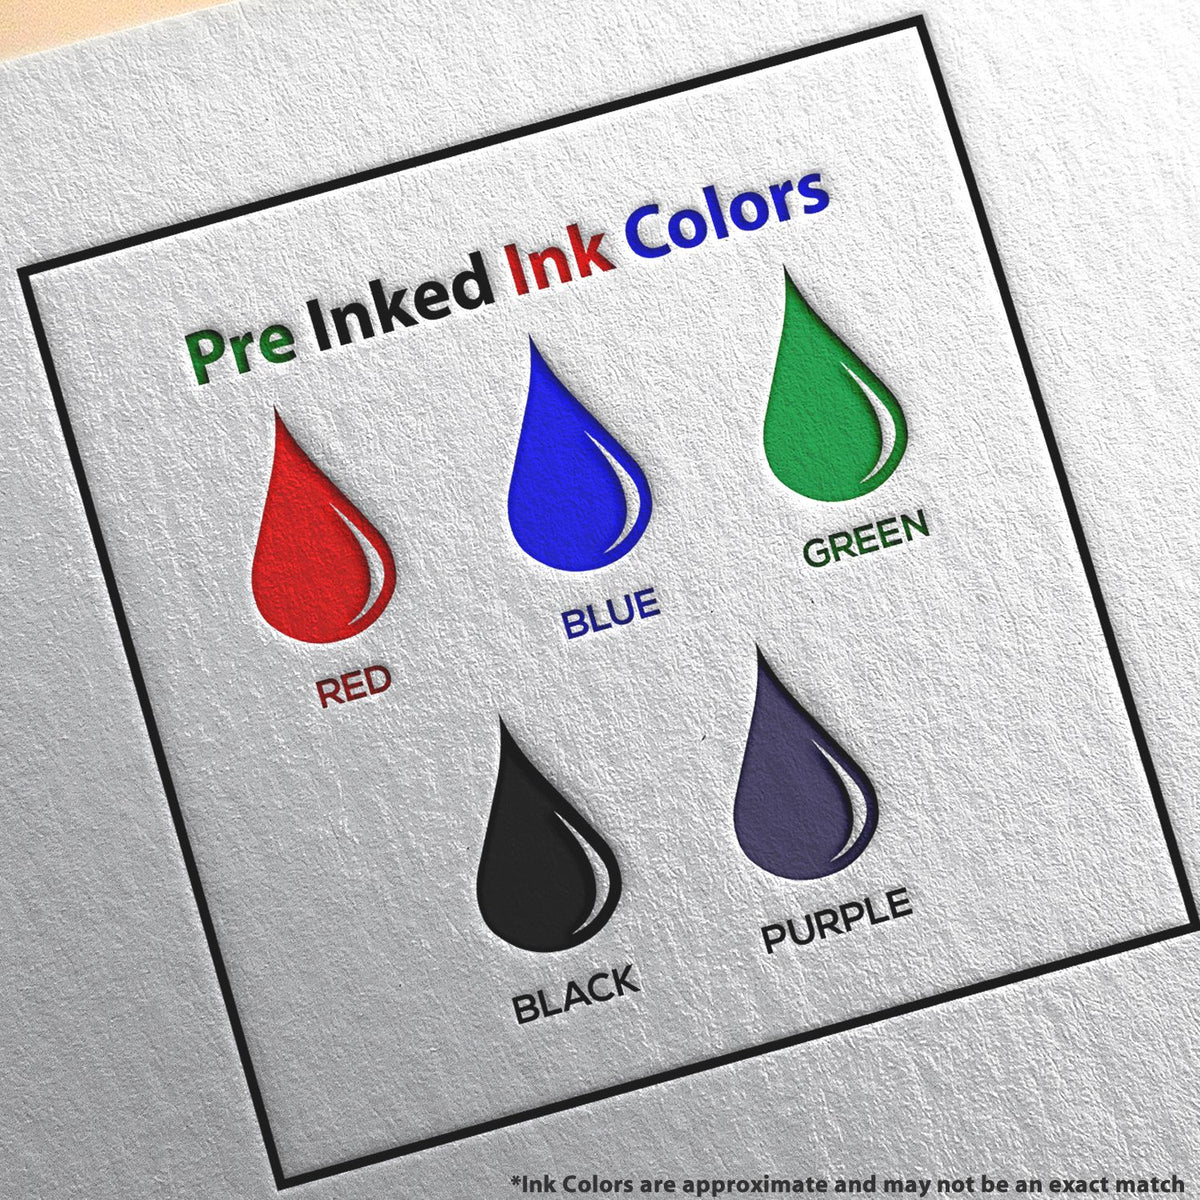 A picture showing the different ink colors or hues available for the MaxLight Premium Pre-Inked Minnesota State Seal Notarial Stamp product.